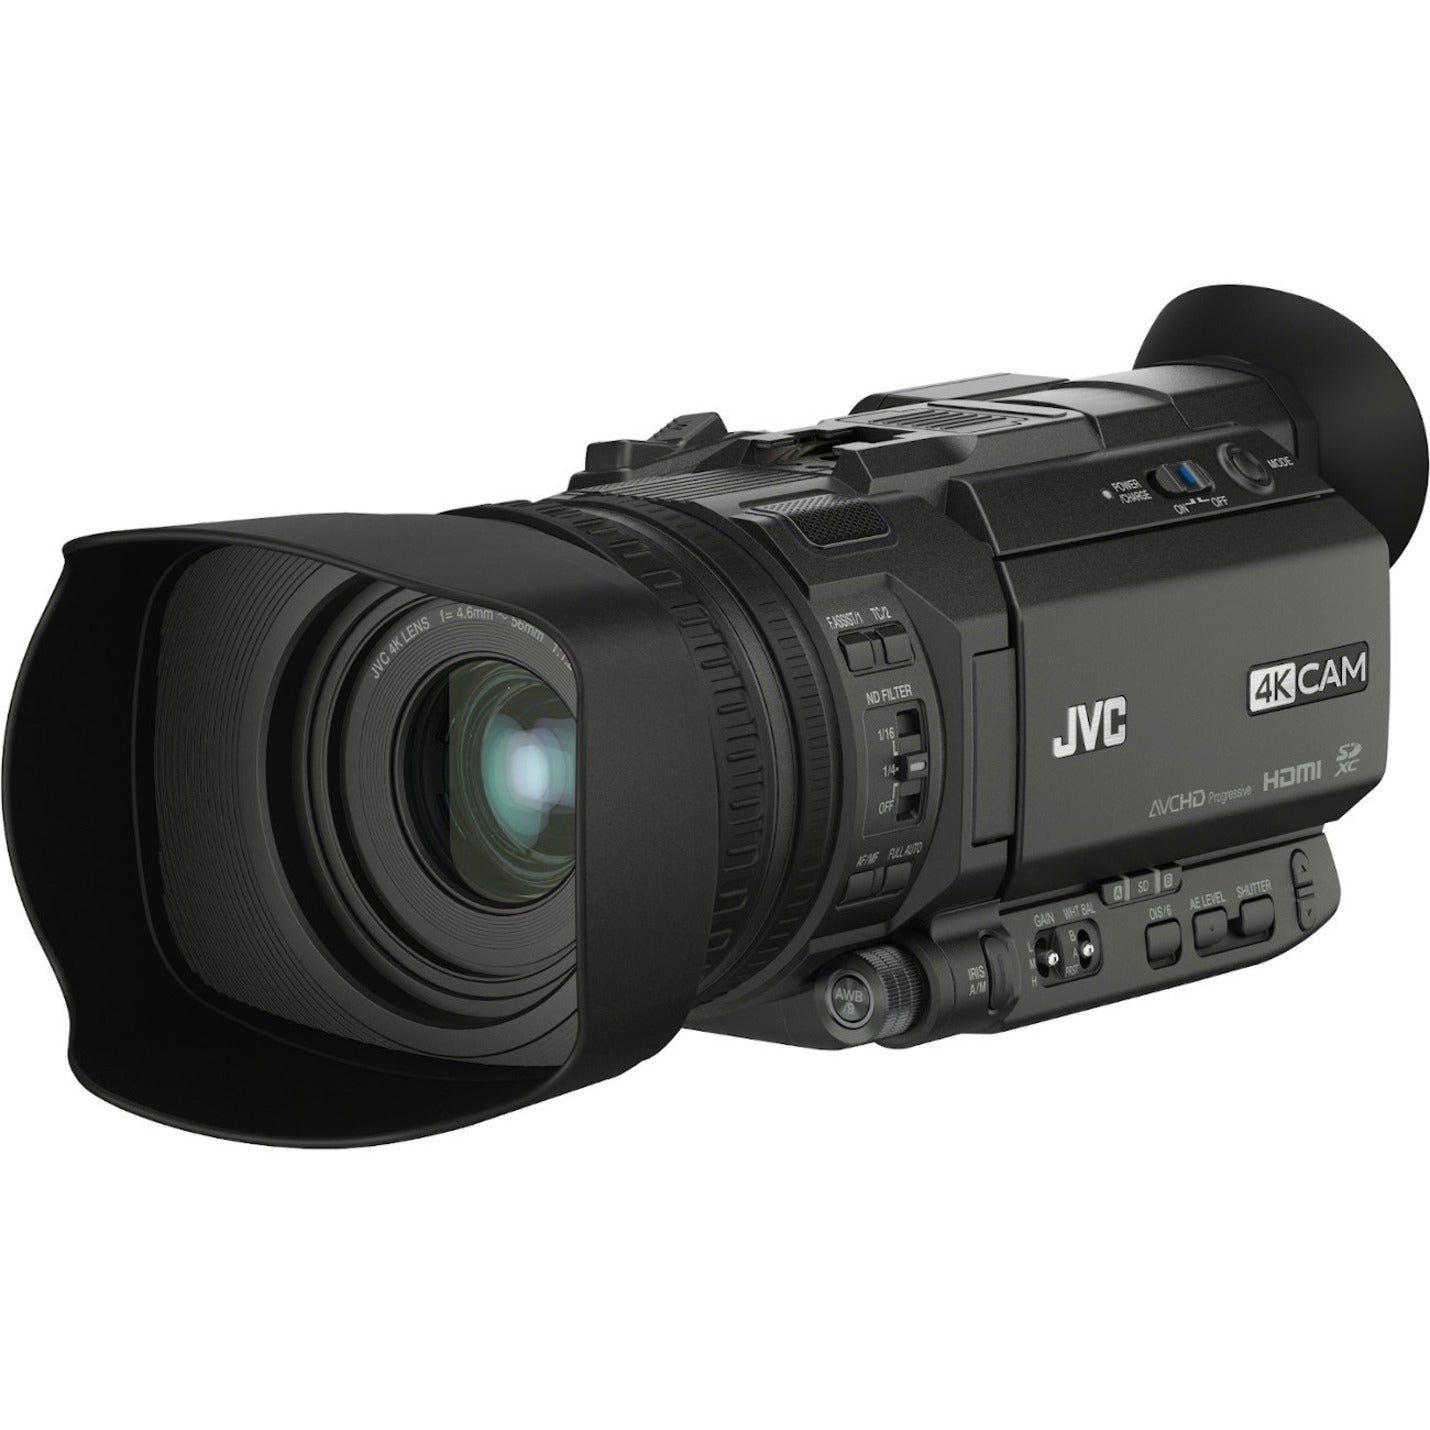 JVC GY-HM170U 4KCAM Compact Handheld Camcorder w/Integrated 12X Lens, Professional Digital Camcorder - 3.5" LCD Screen, 1/2.3" CMOS, 4K